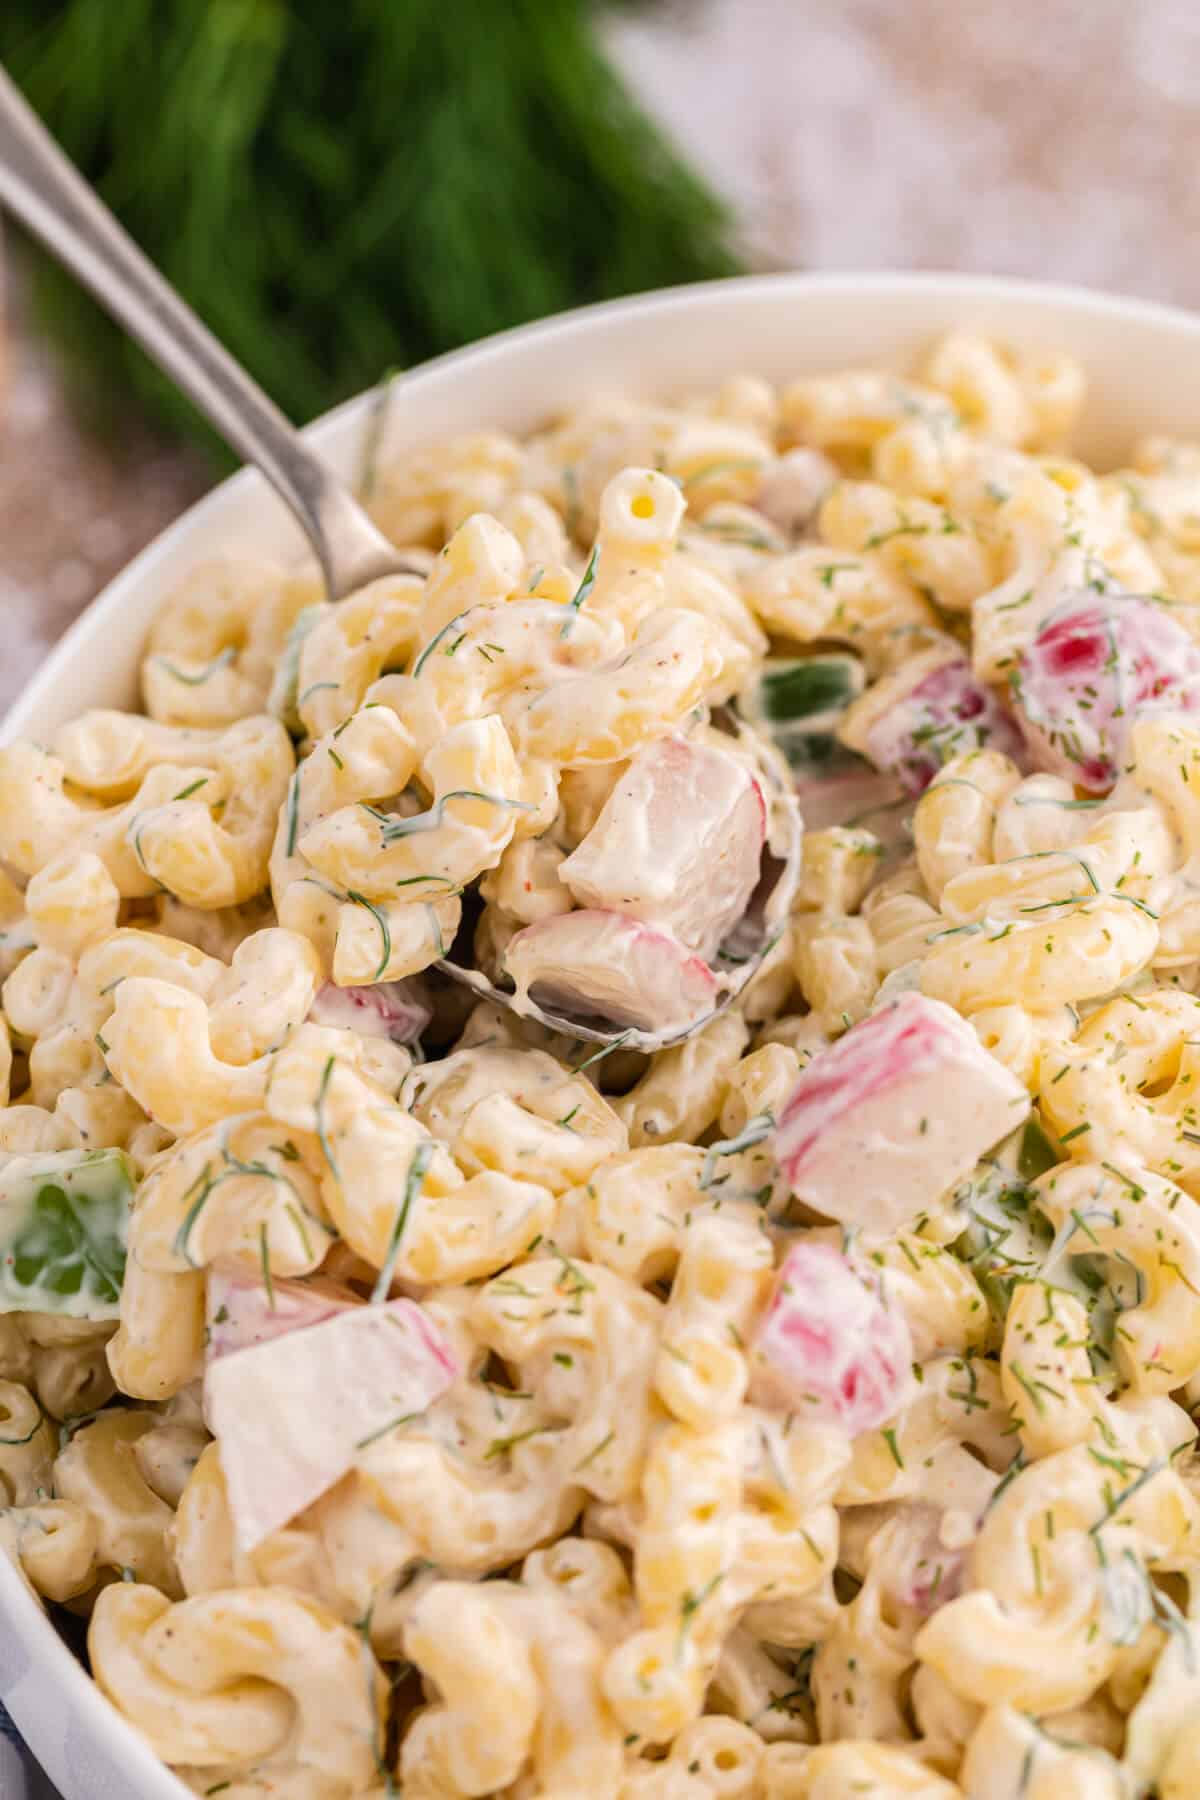 Macaroni dill salad in a bowl with a spoon.